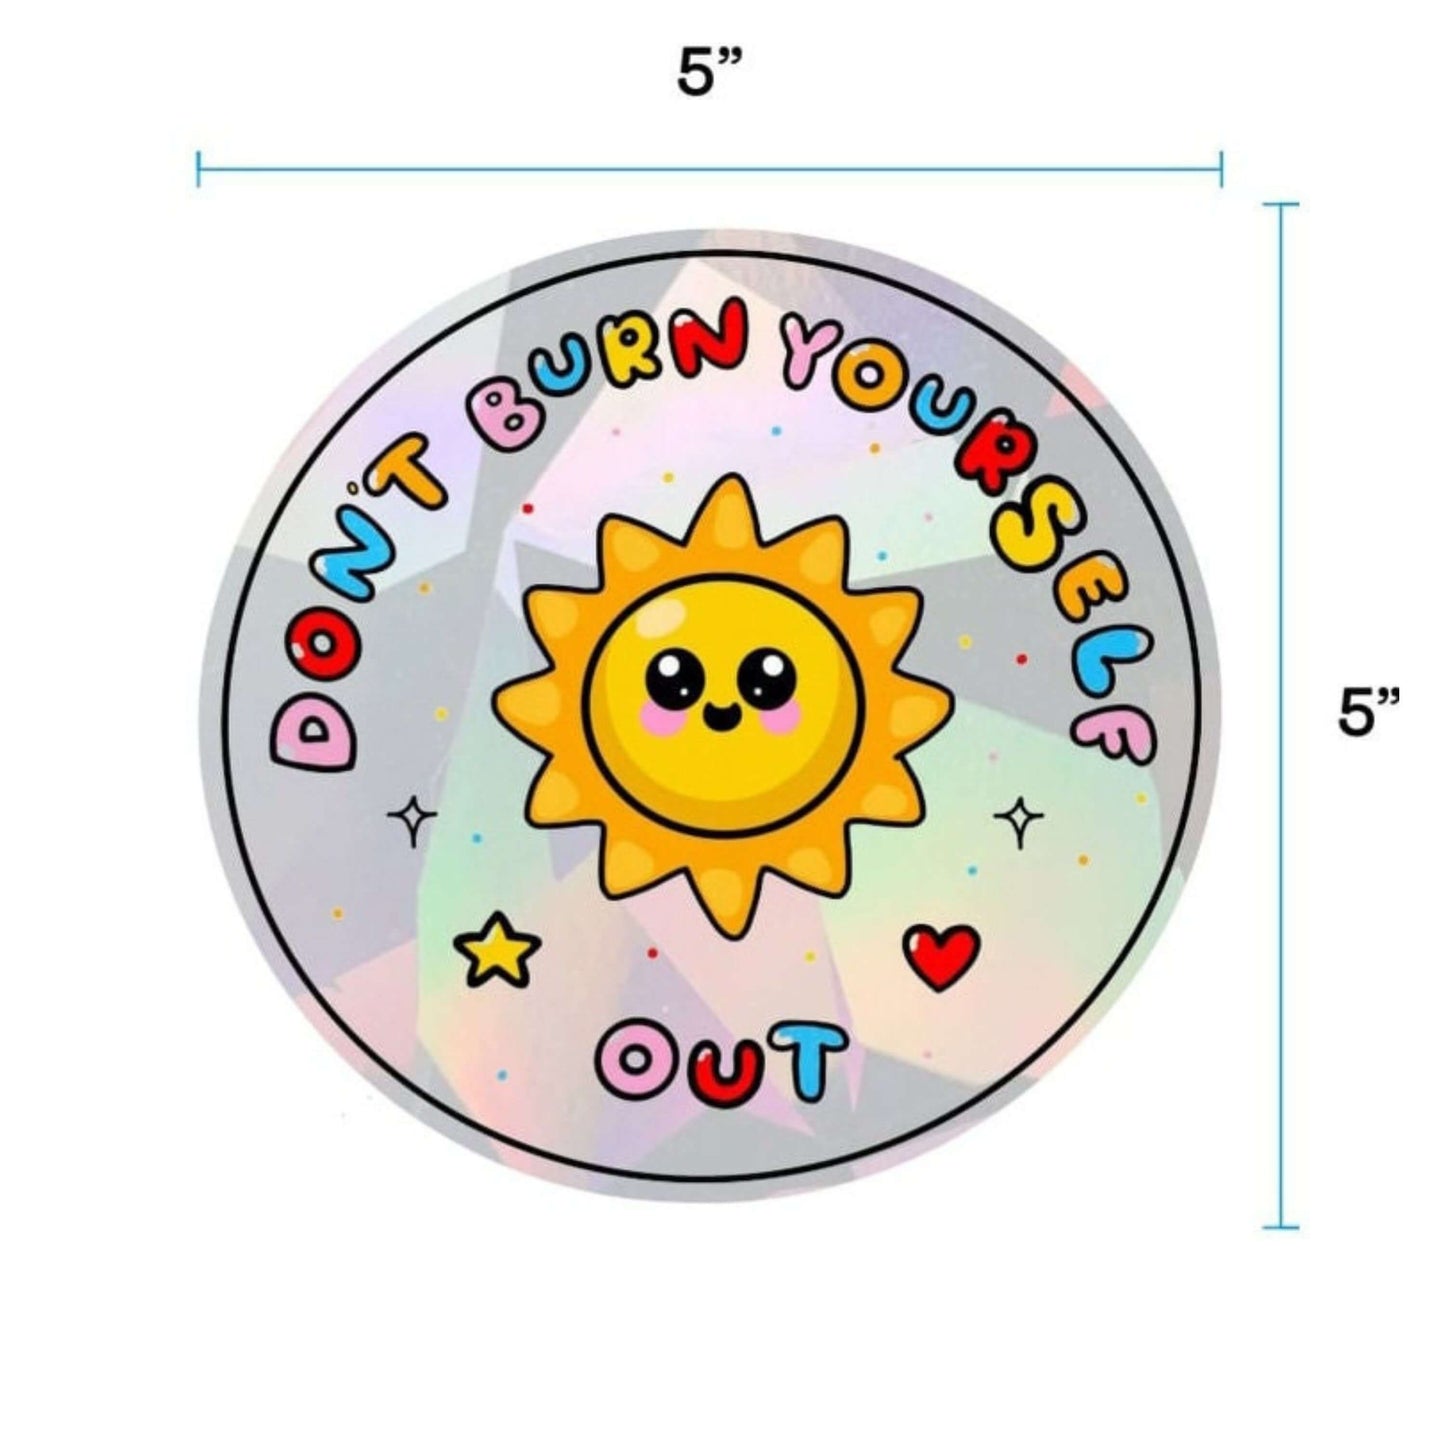 The Don't Burn Yourself Out Sun Catcher Rainbow Window Sticker on a white background with two blue inch measurement scales of the width and height. The circle holographic sticker features a smiling sunshine with pink blush in the middle with rainbow bubble writing reading 'don't burn yourself out' with a yellow star, red heart, black sparkle outlines and rainbow dots all over. The design is inspired by self care.